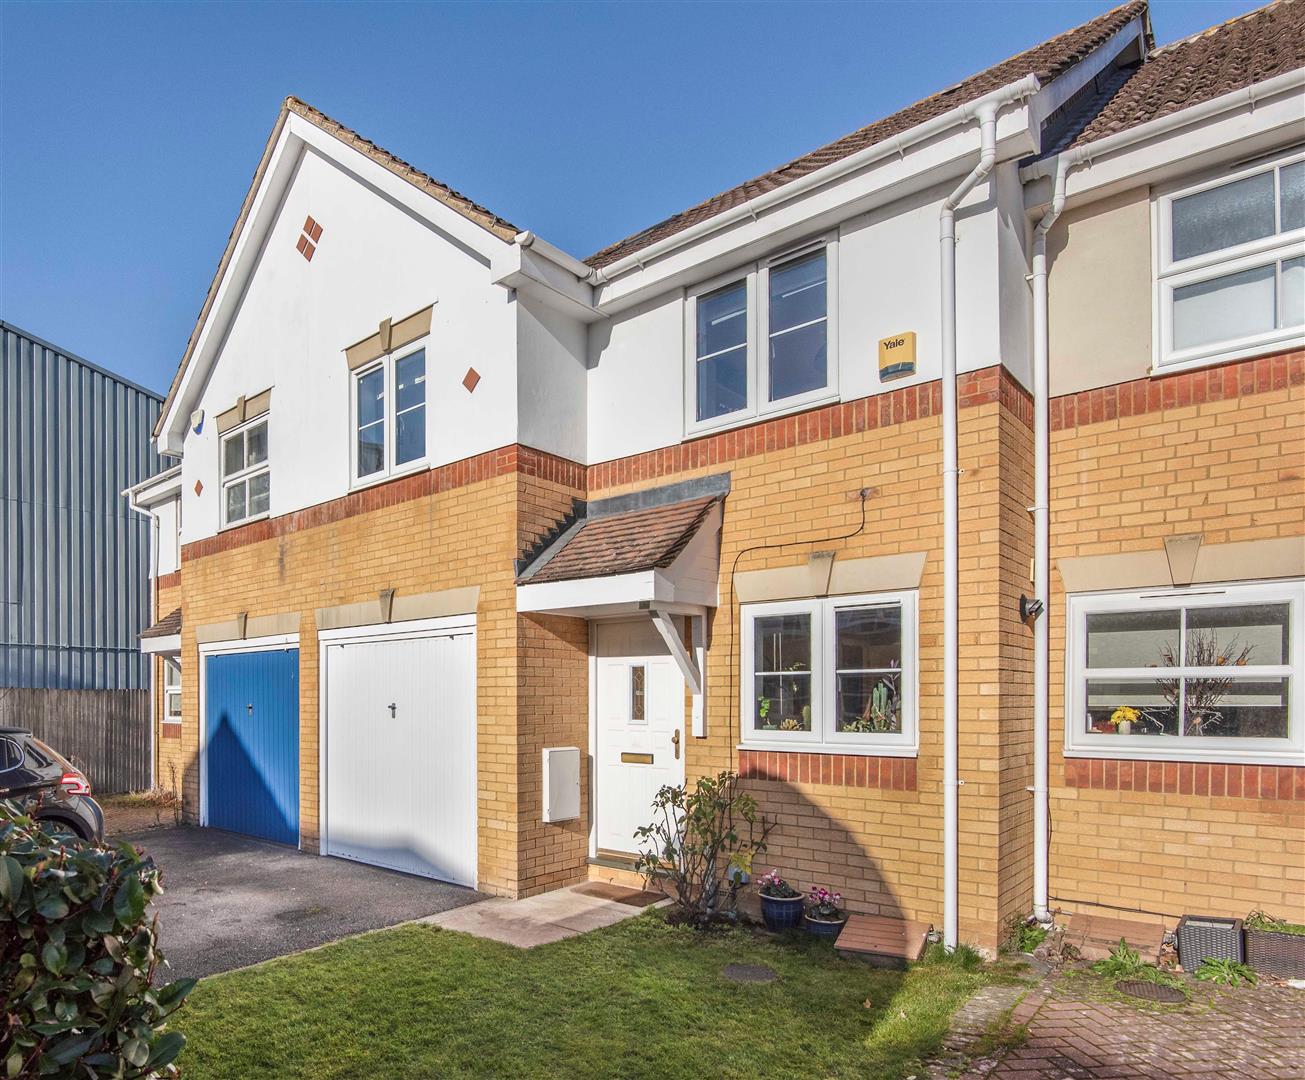 Denbeigh Place Reading house for sale in Reading